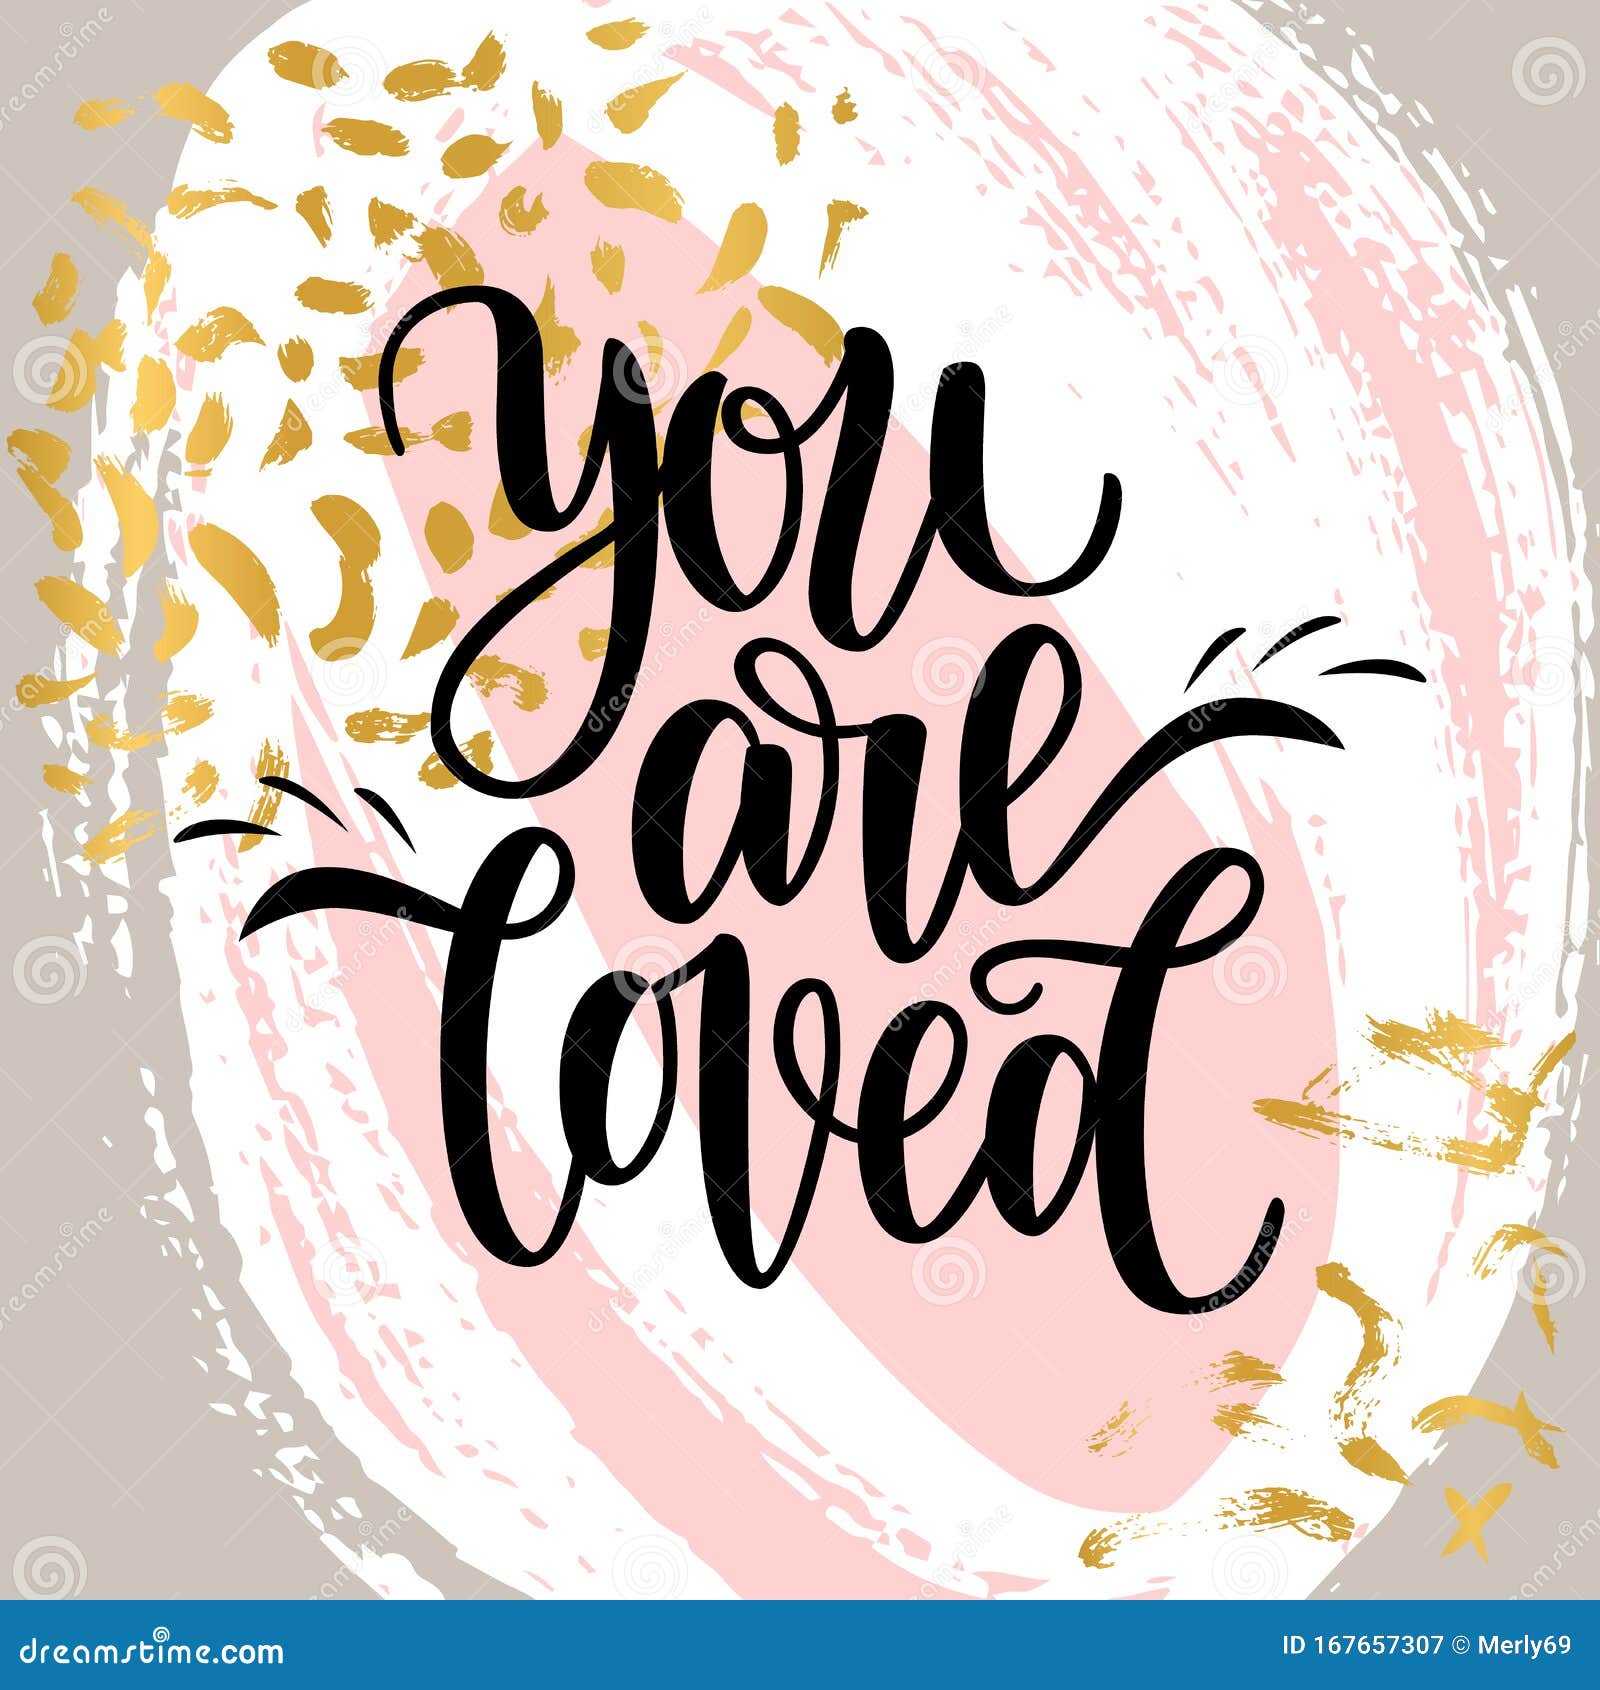 Hand Written You Are Loved Phrase. Card For Valentines Day, 14 February ...